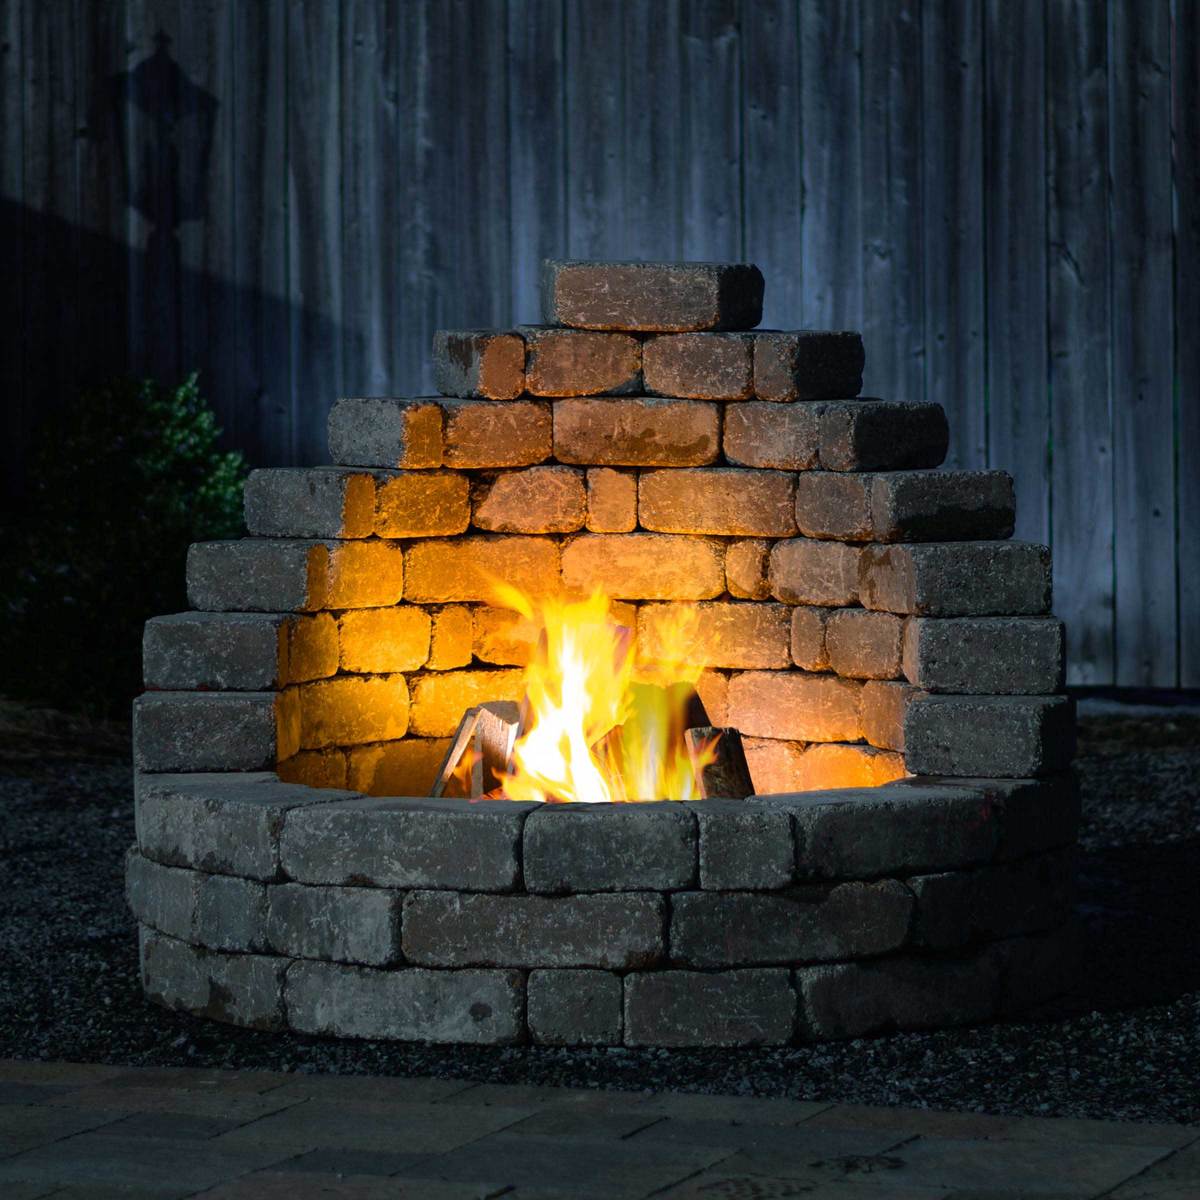 My Upsacle Fire Pit Is An Instant, Pre Built Fire Pit